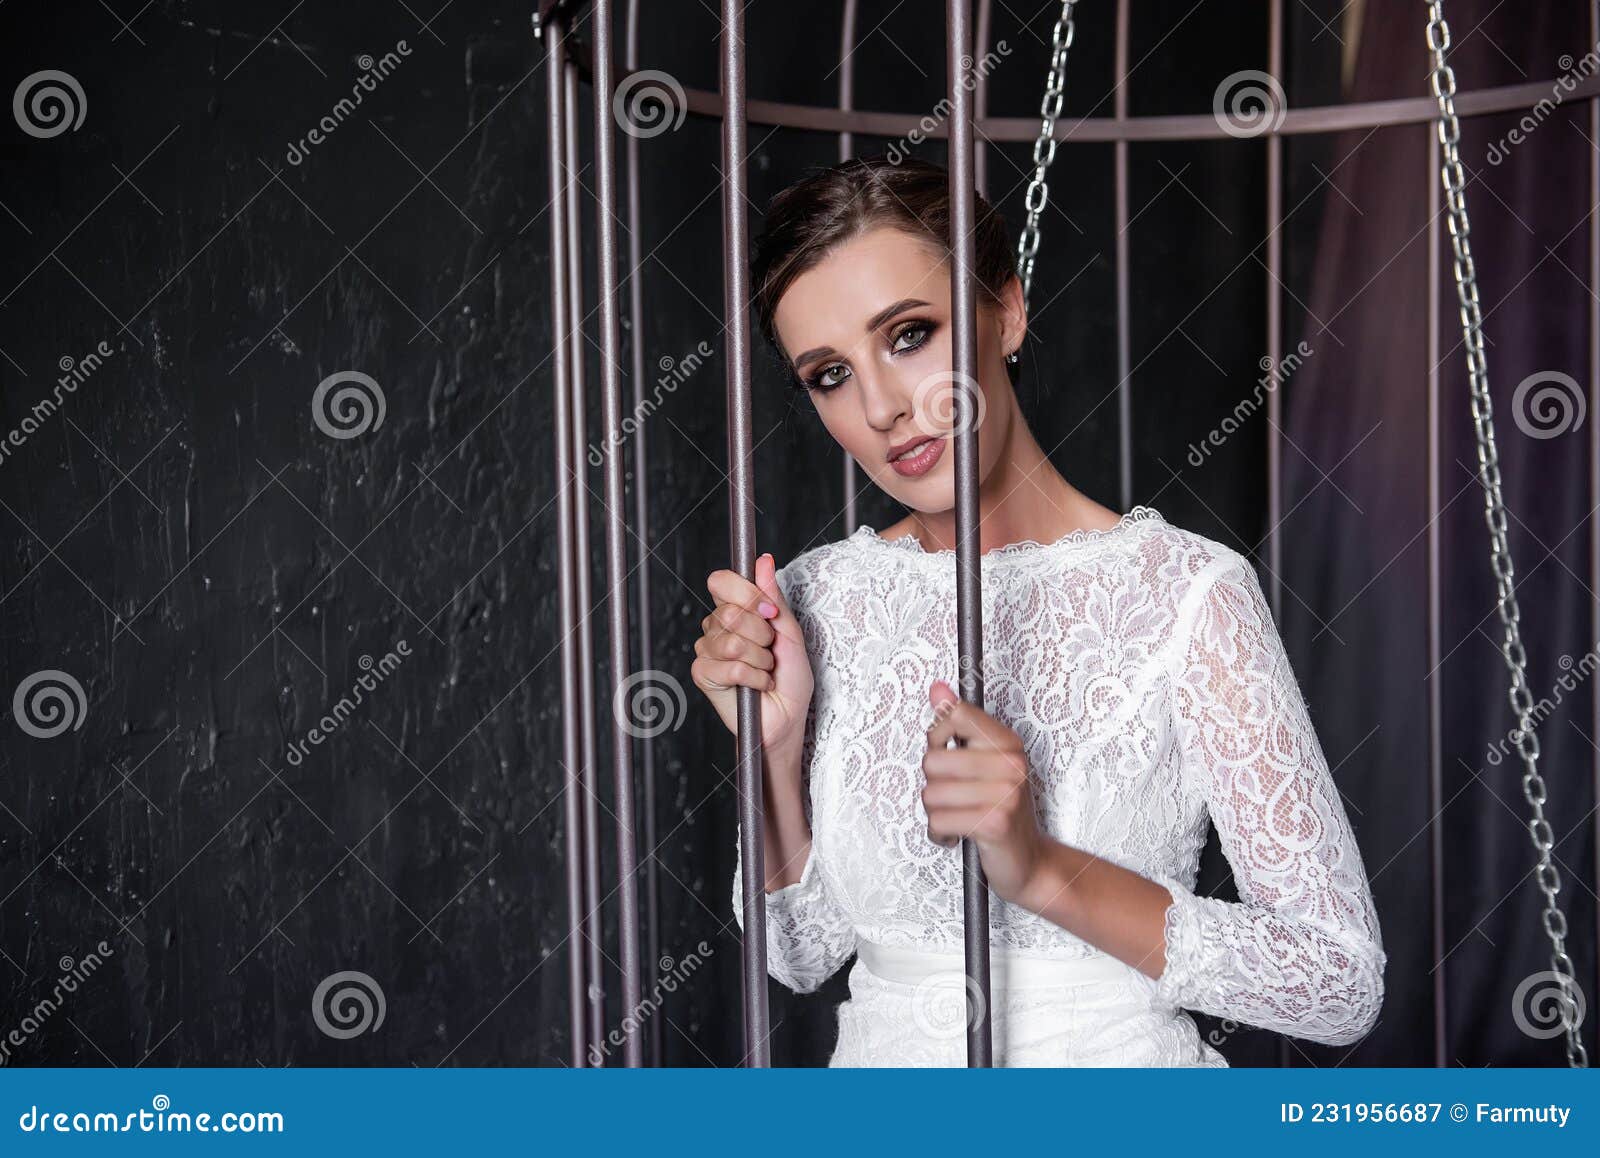 Fashion Bride In An Iron Cage Unhappily Looking Out From Behind Bars Life Out Of Will Stock